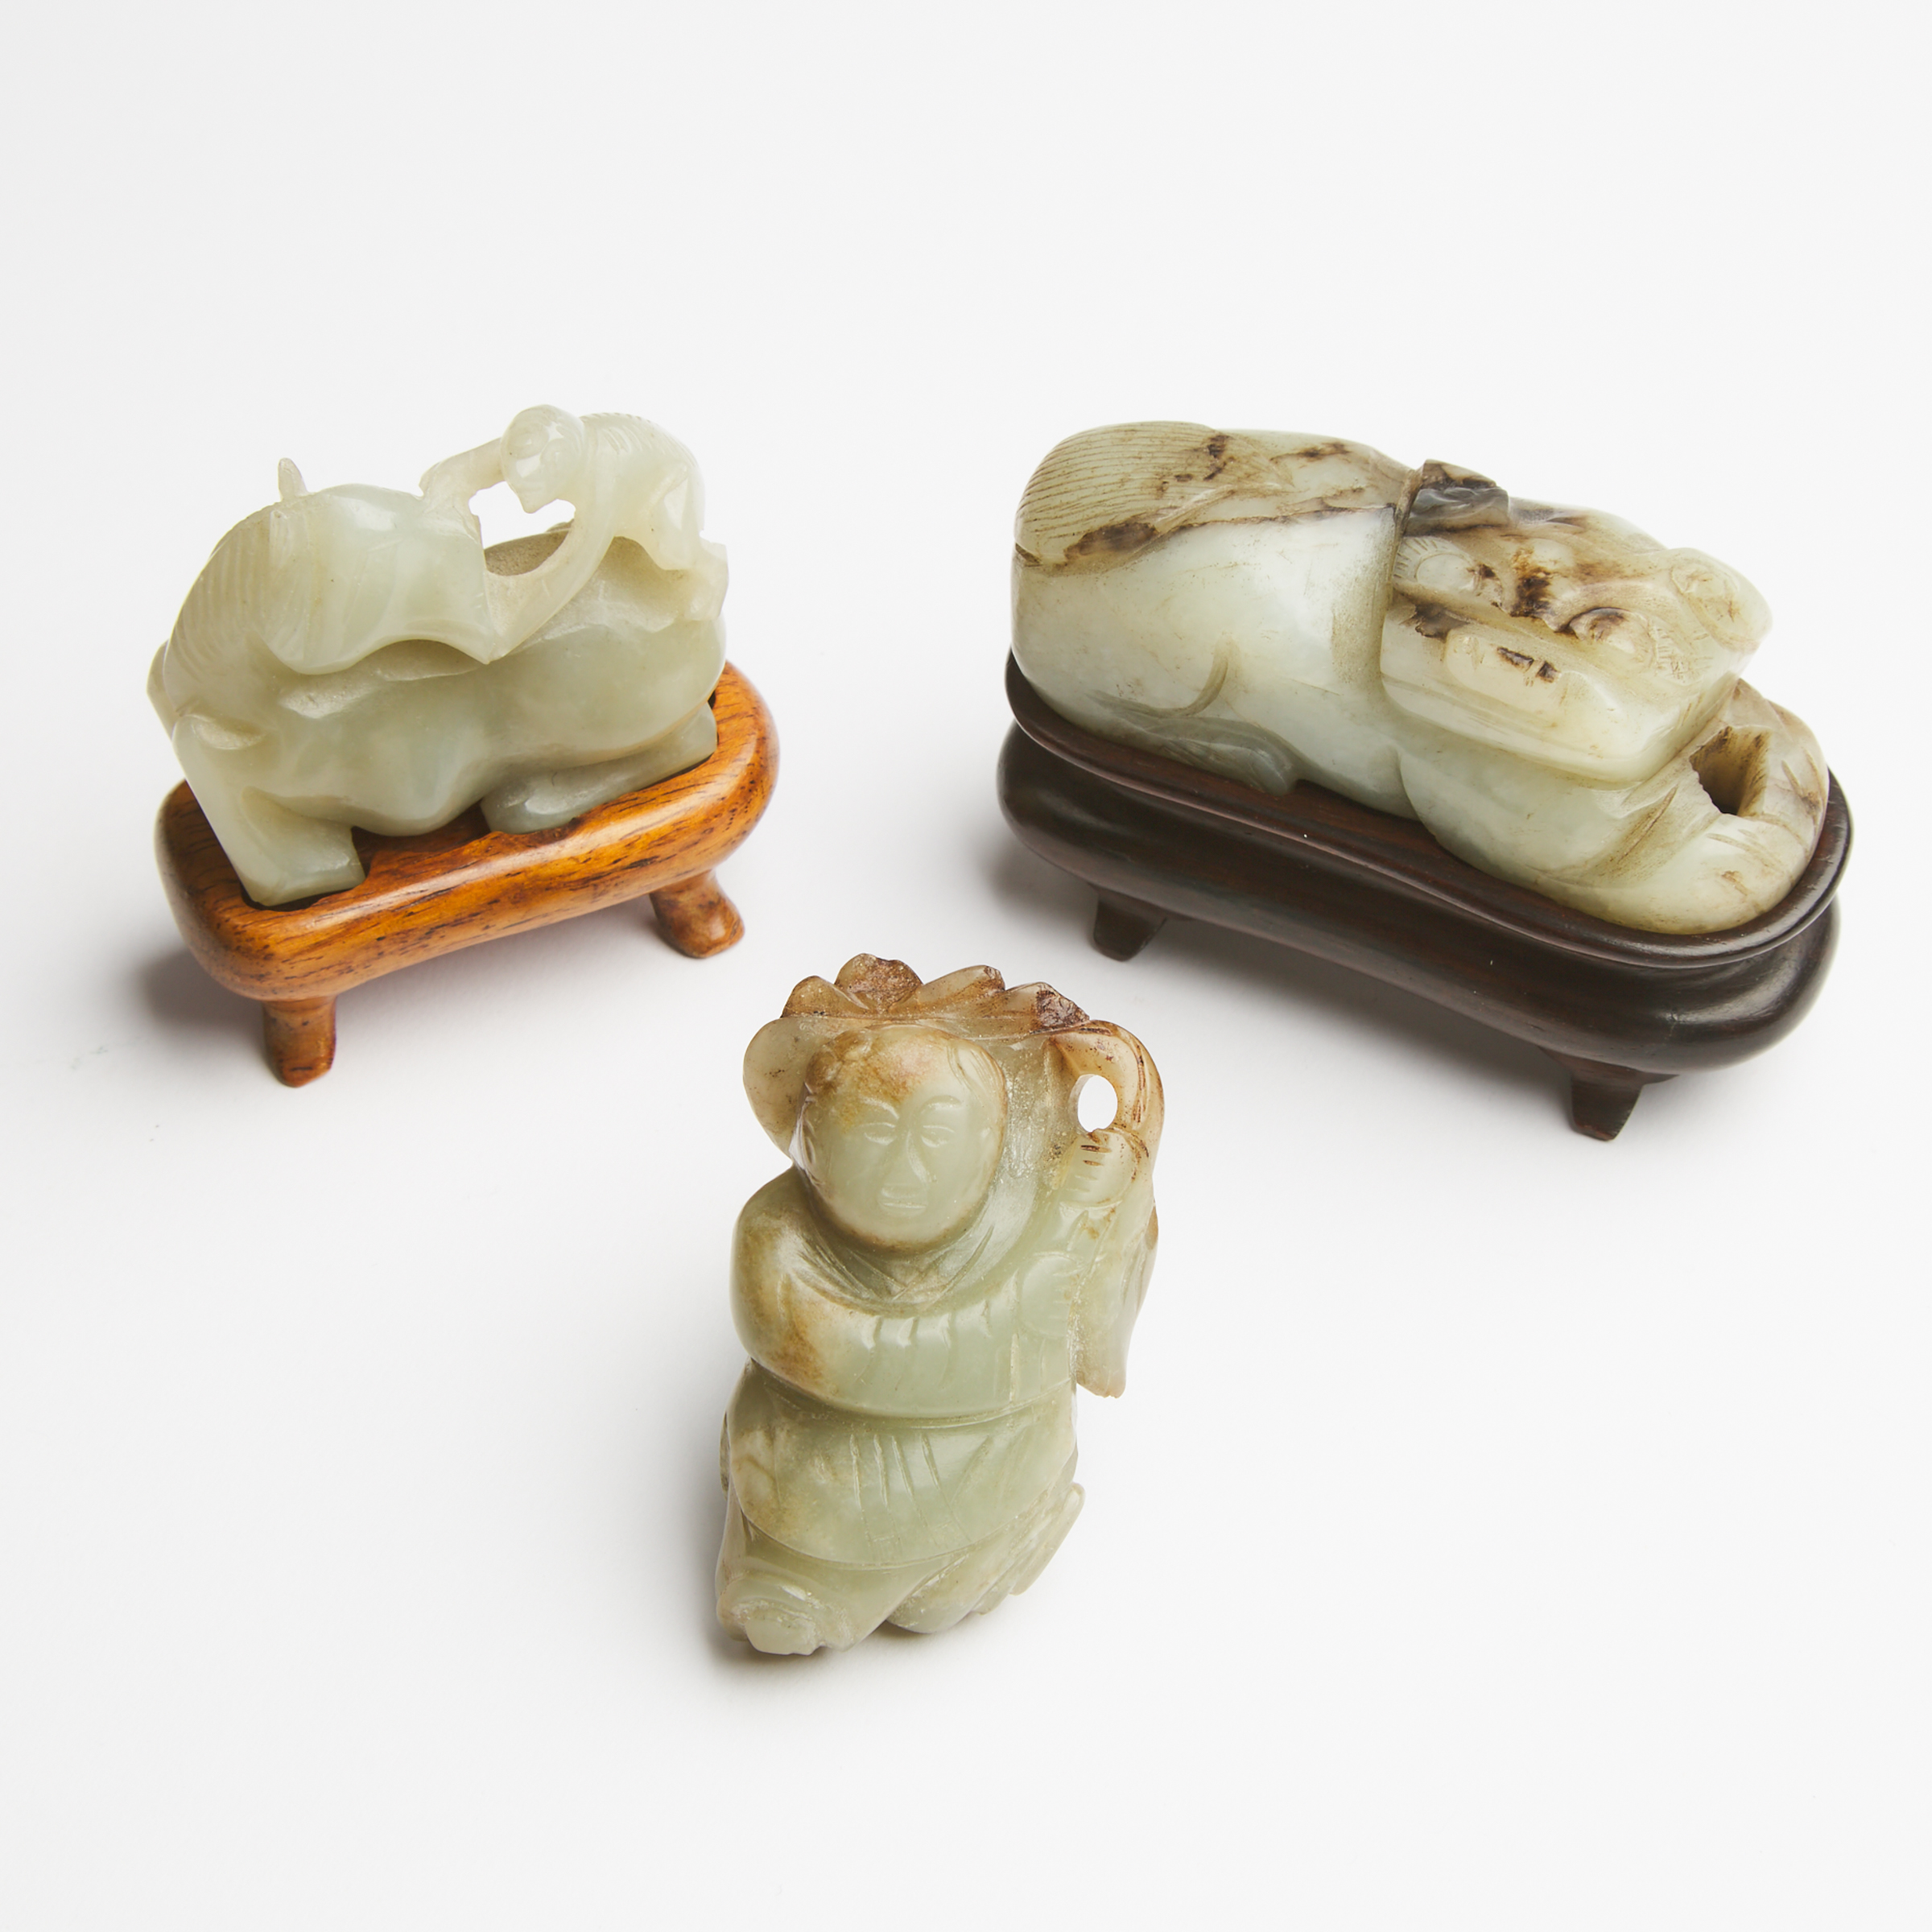 A Group of Three Jade Carvings, Ming Dynasty (1368-1644)